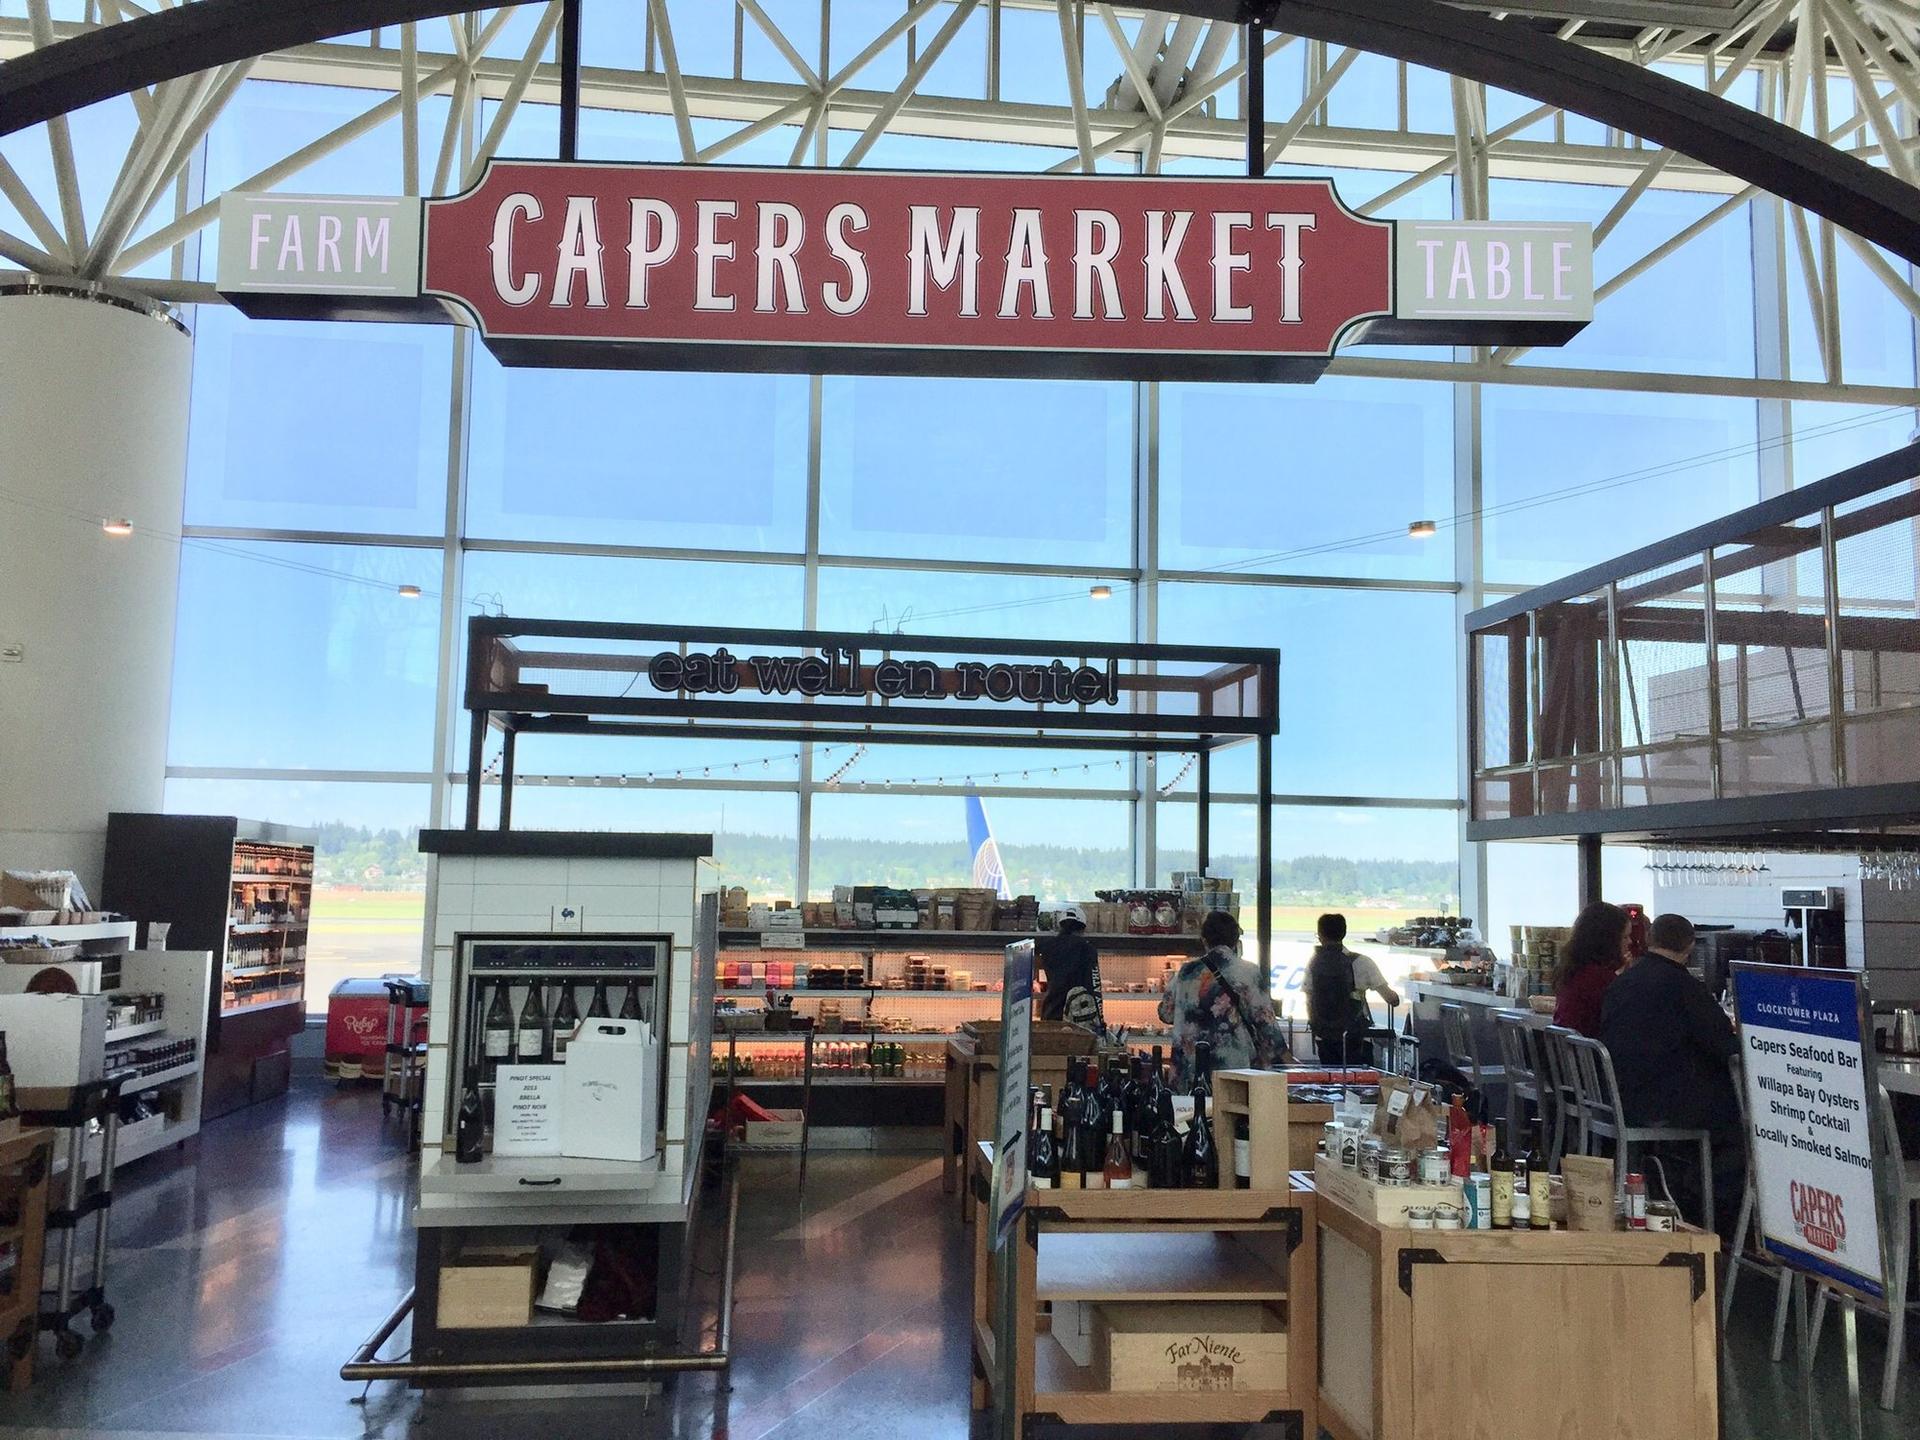 Capers Market image 7 of 46